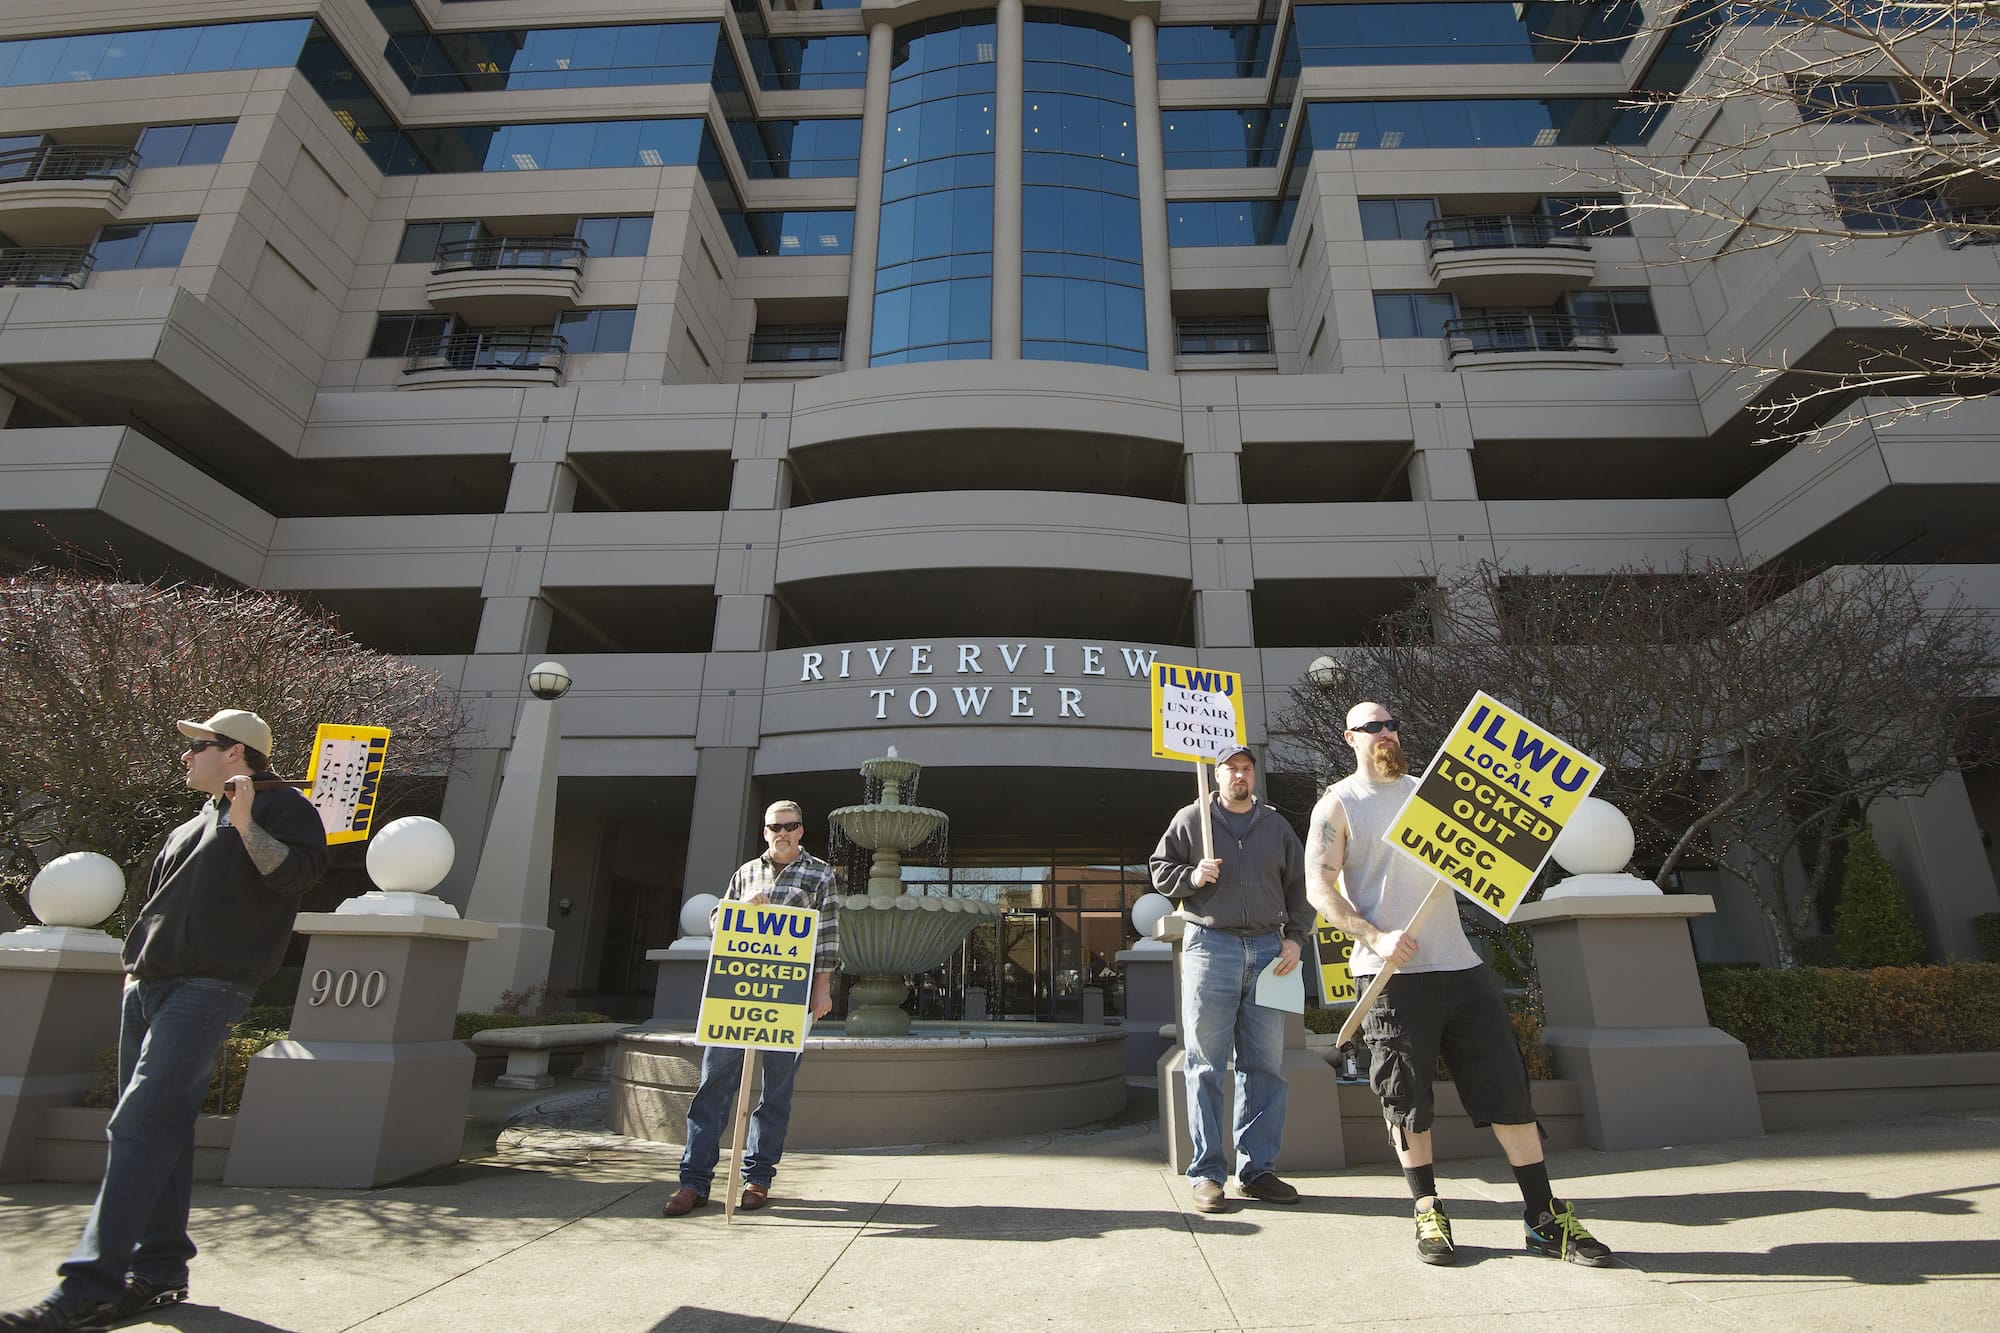 Picketers carry signs Thursday outside Riverview Tower in downtown Vancouver, where United Grain Corp.  has an office. The company locked out 44 International Longshore and Warehouse workers on Feb.